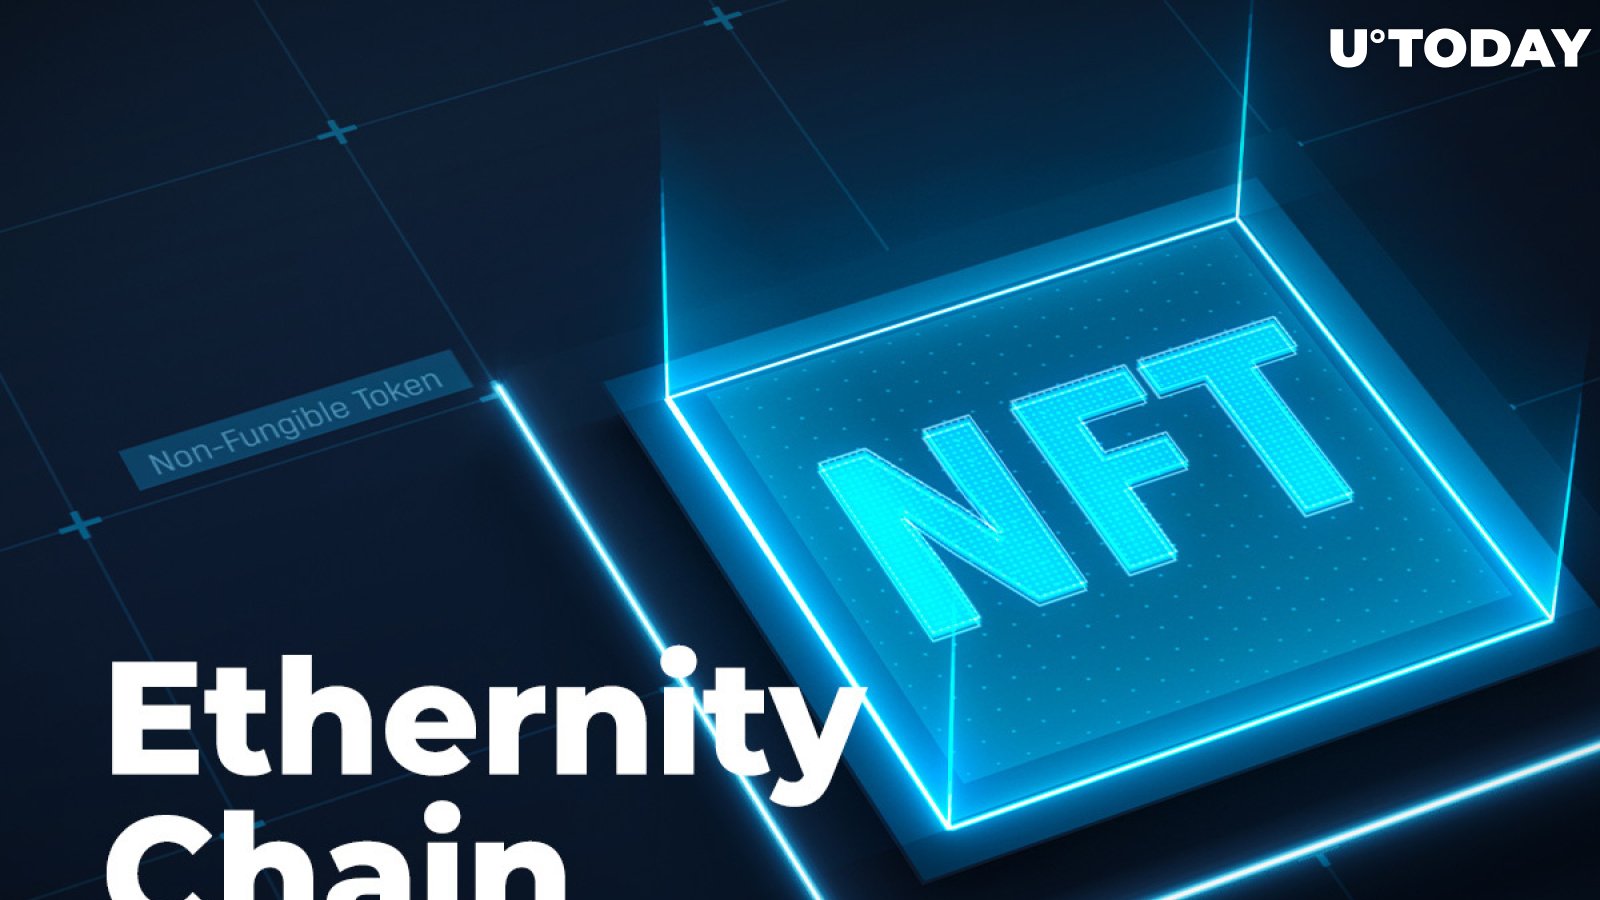 Ethernity Chain (ERN) Announces Massive NFT Auction to Commemorate Early Internet History